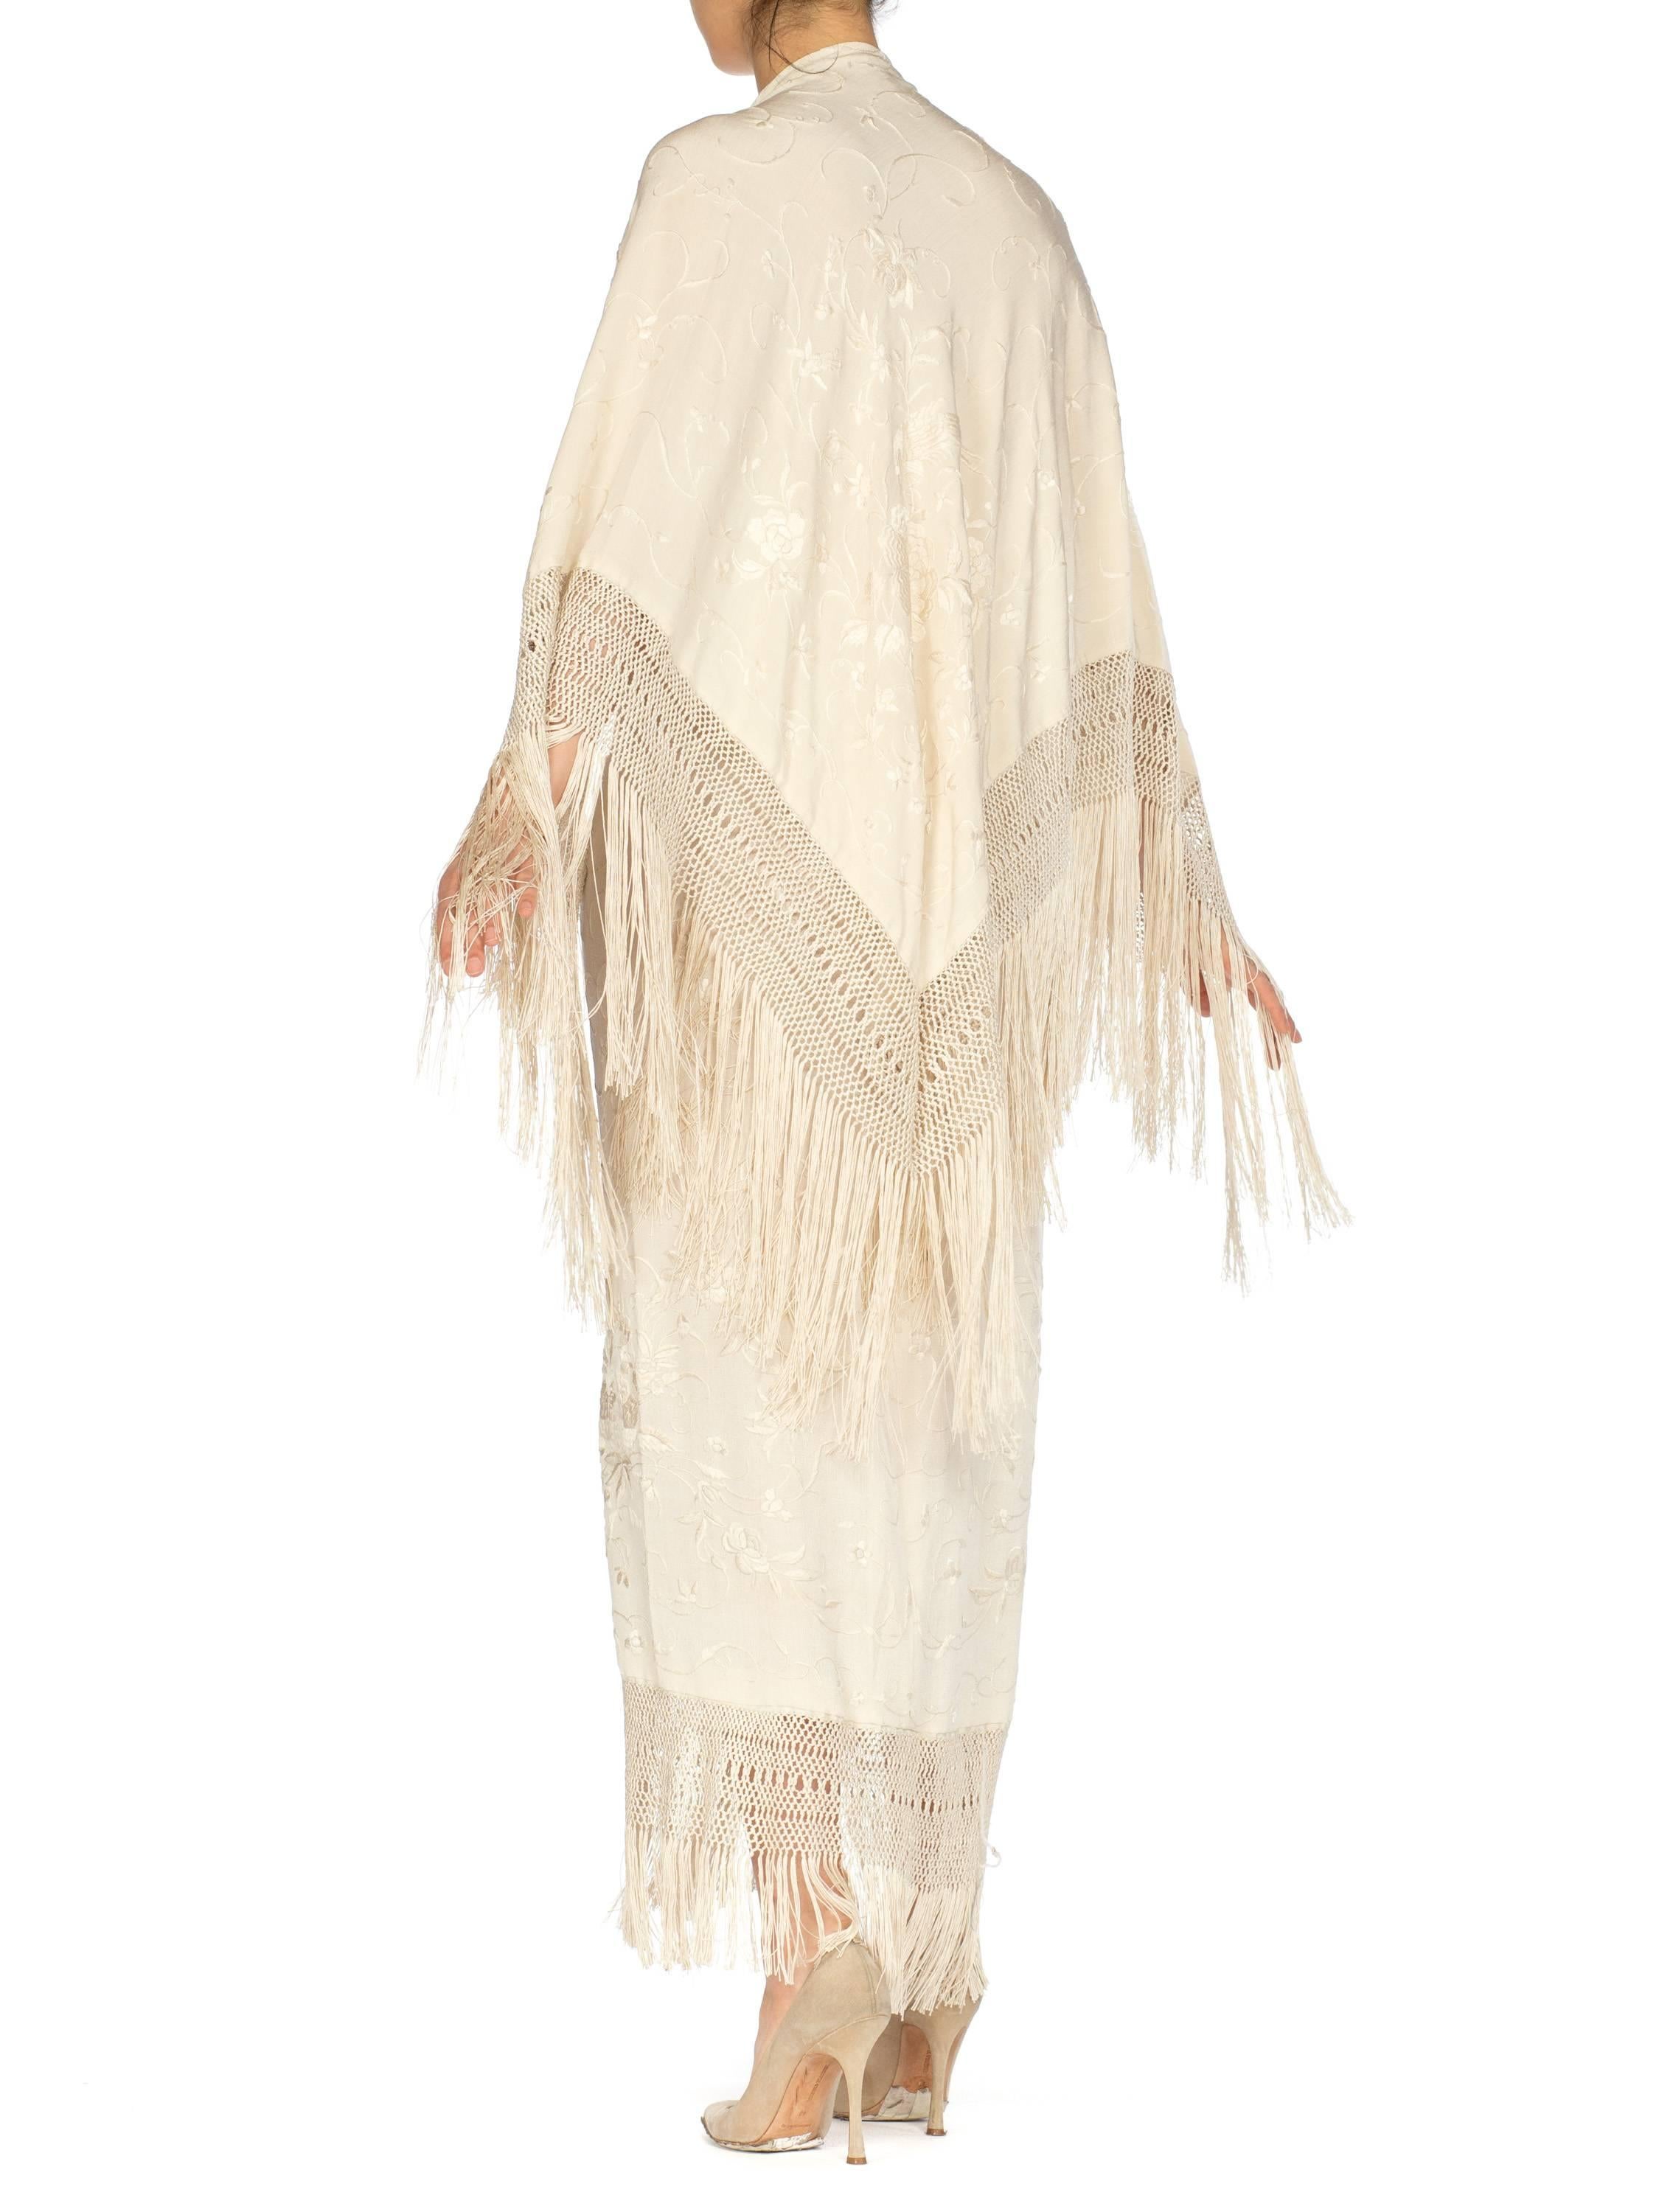 Women's or Men's Hand Embroidered Antique Piano Shawl Bias Dress with Cape and Fringe